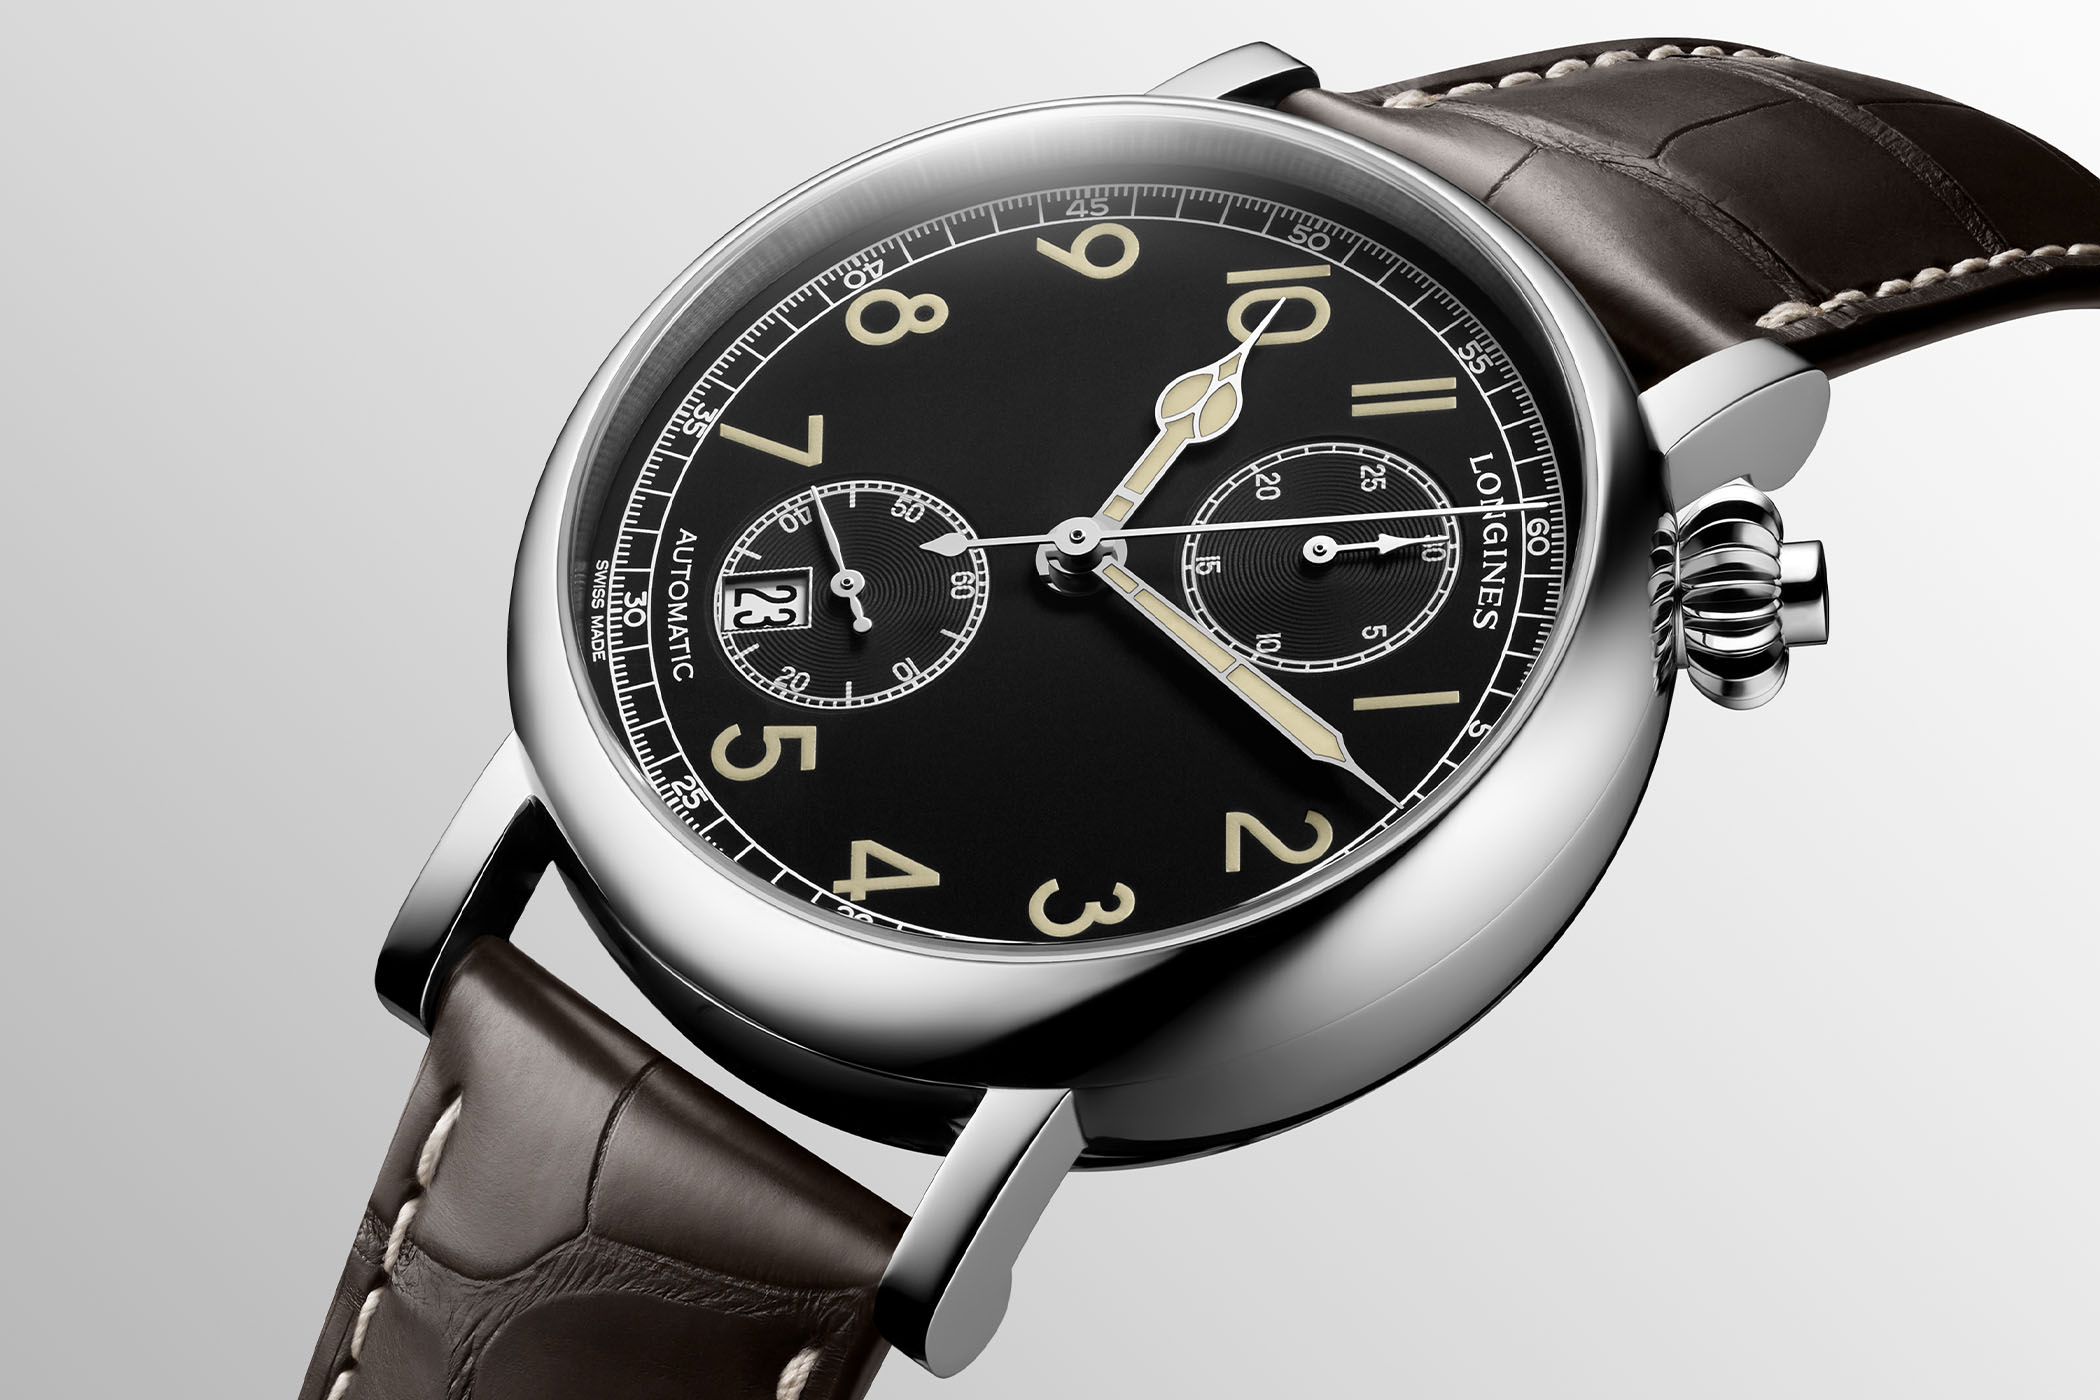 The Longines Avigation Watch Type A-7 1935 - 2020 model